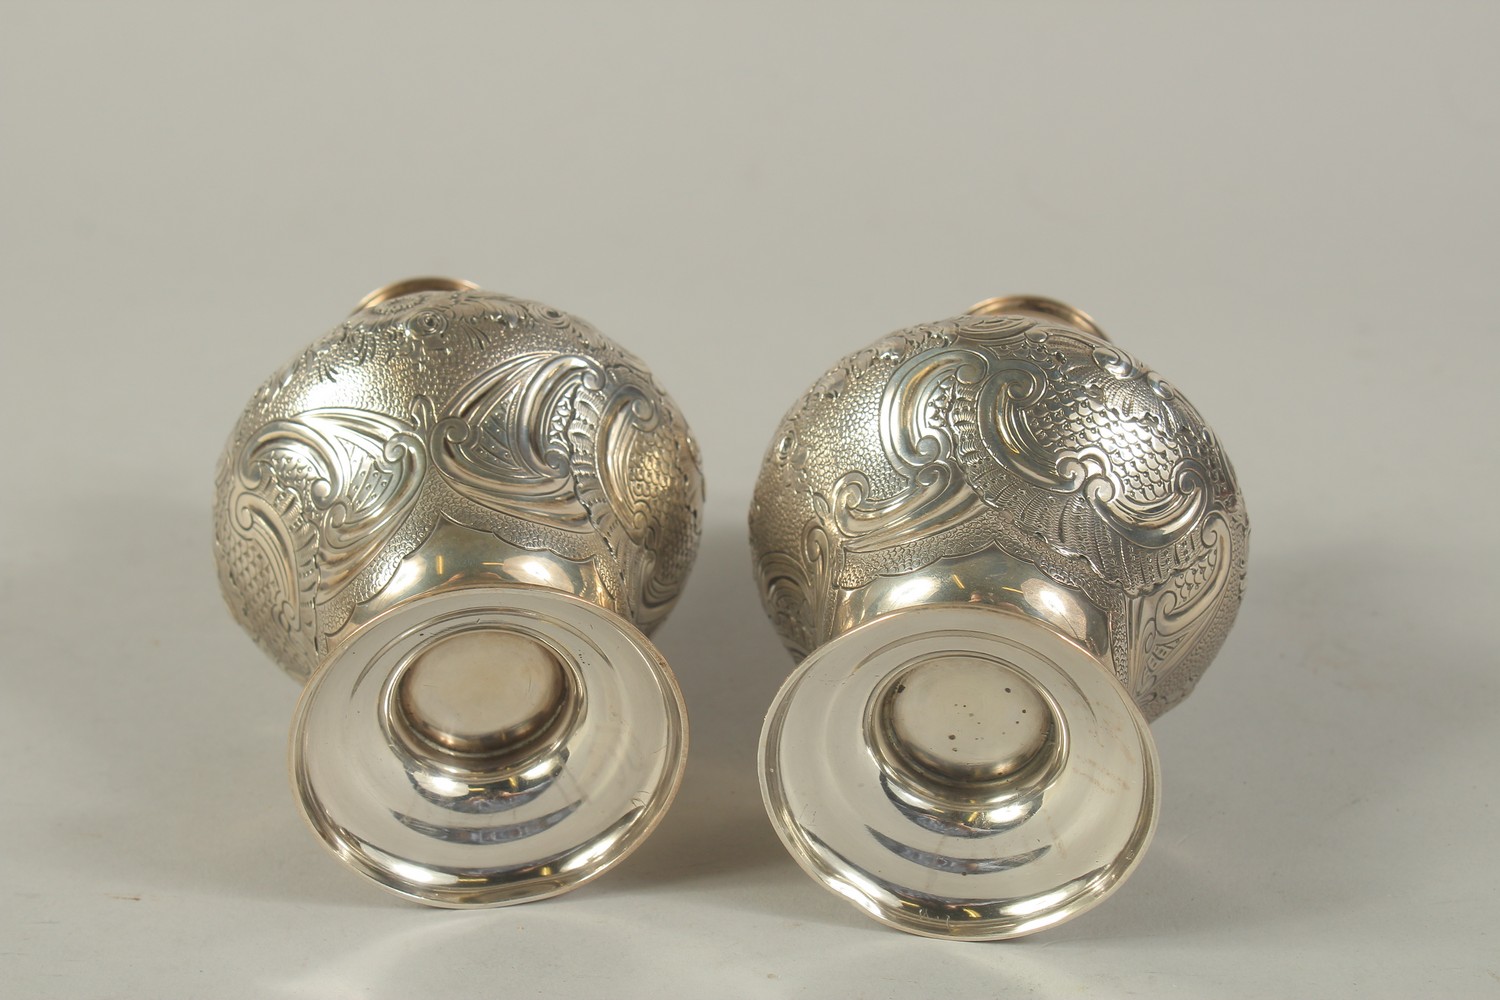 A PAIR OF VICTORIAN SILVER SUGAR CASTERS with repousse decoration and scrolls. London 1909. Maker: - Image 4 of 4